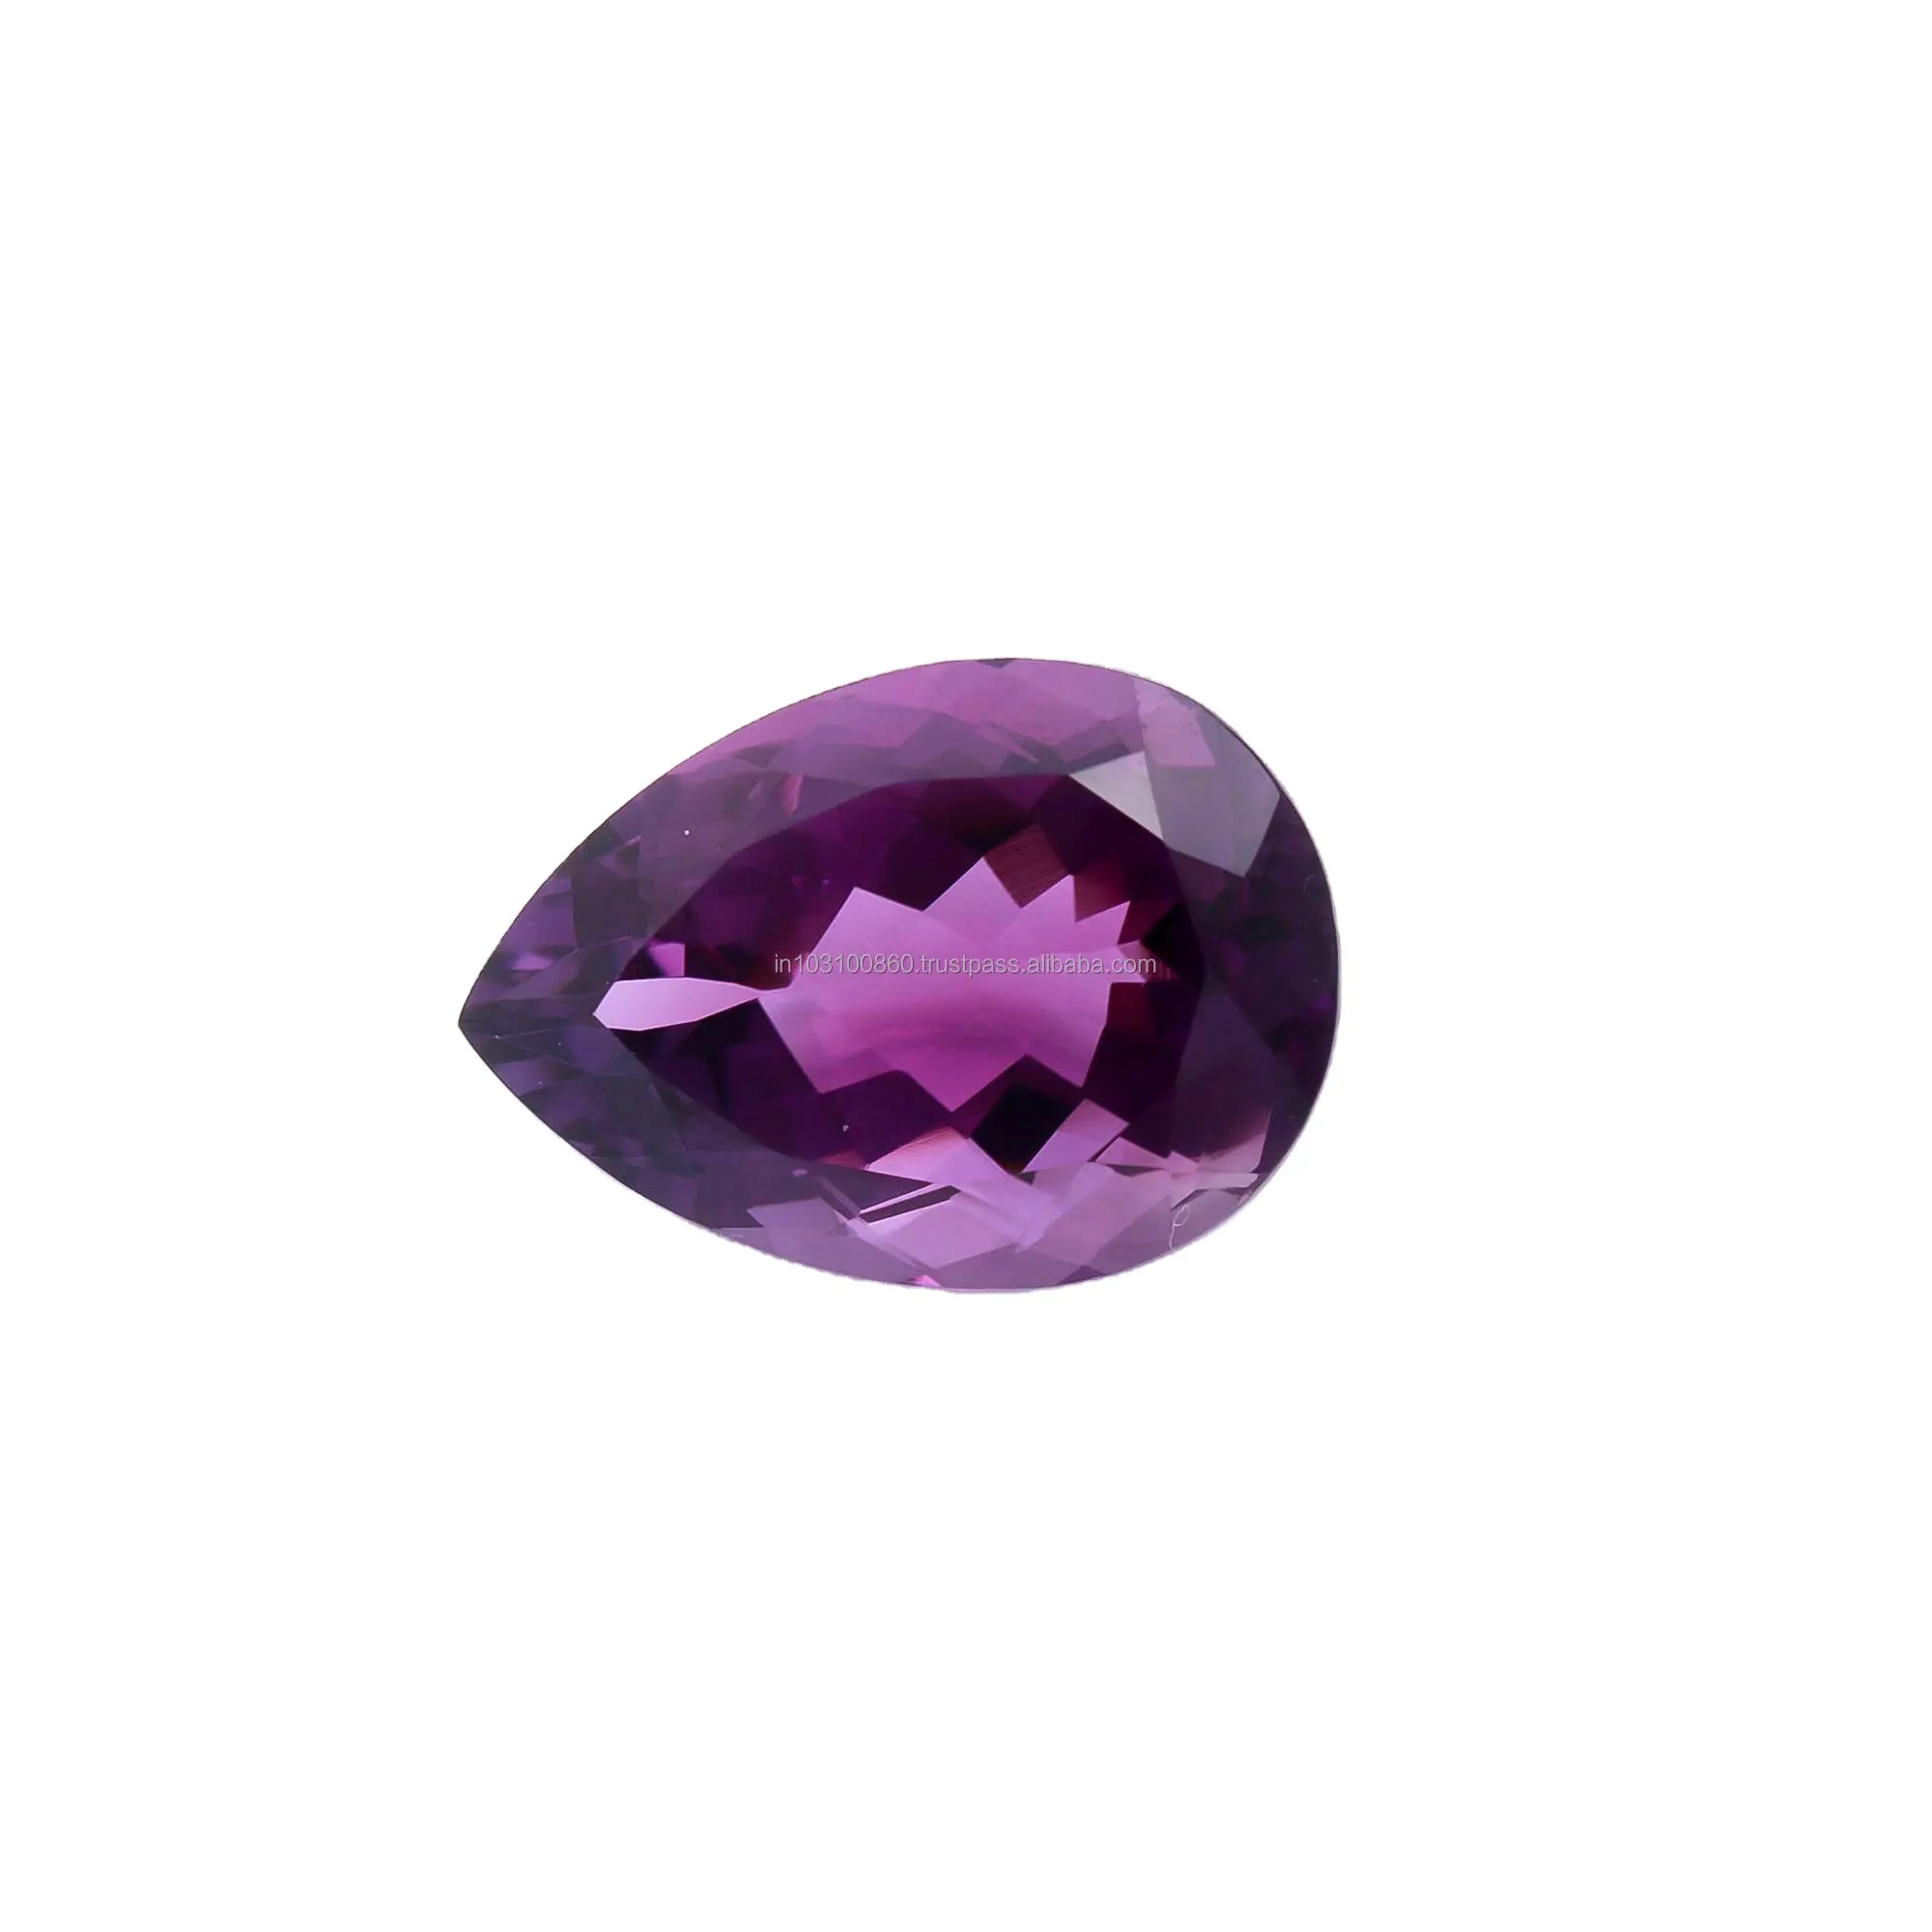 Pear Shaped Purple Amethyst Natural Top Quality Faceted Cutting Loose Gemstone Wholesale Ring Earring Making Jewelry Making